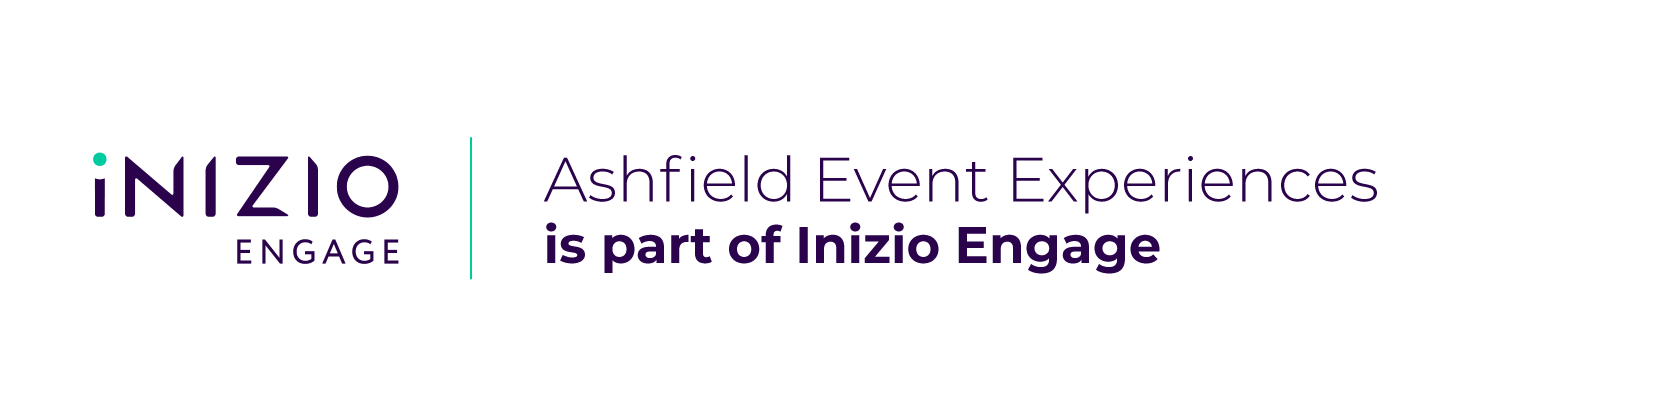 Ashfield Event Experiences is a division of The Creative Engagement Group